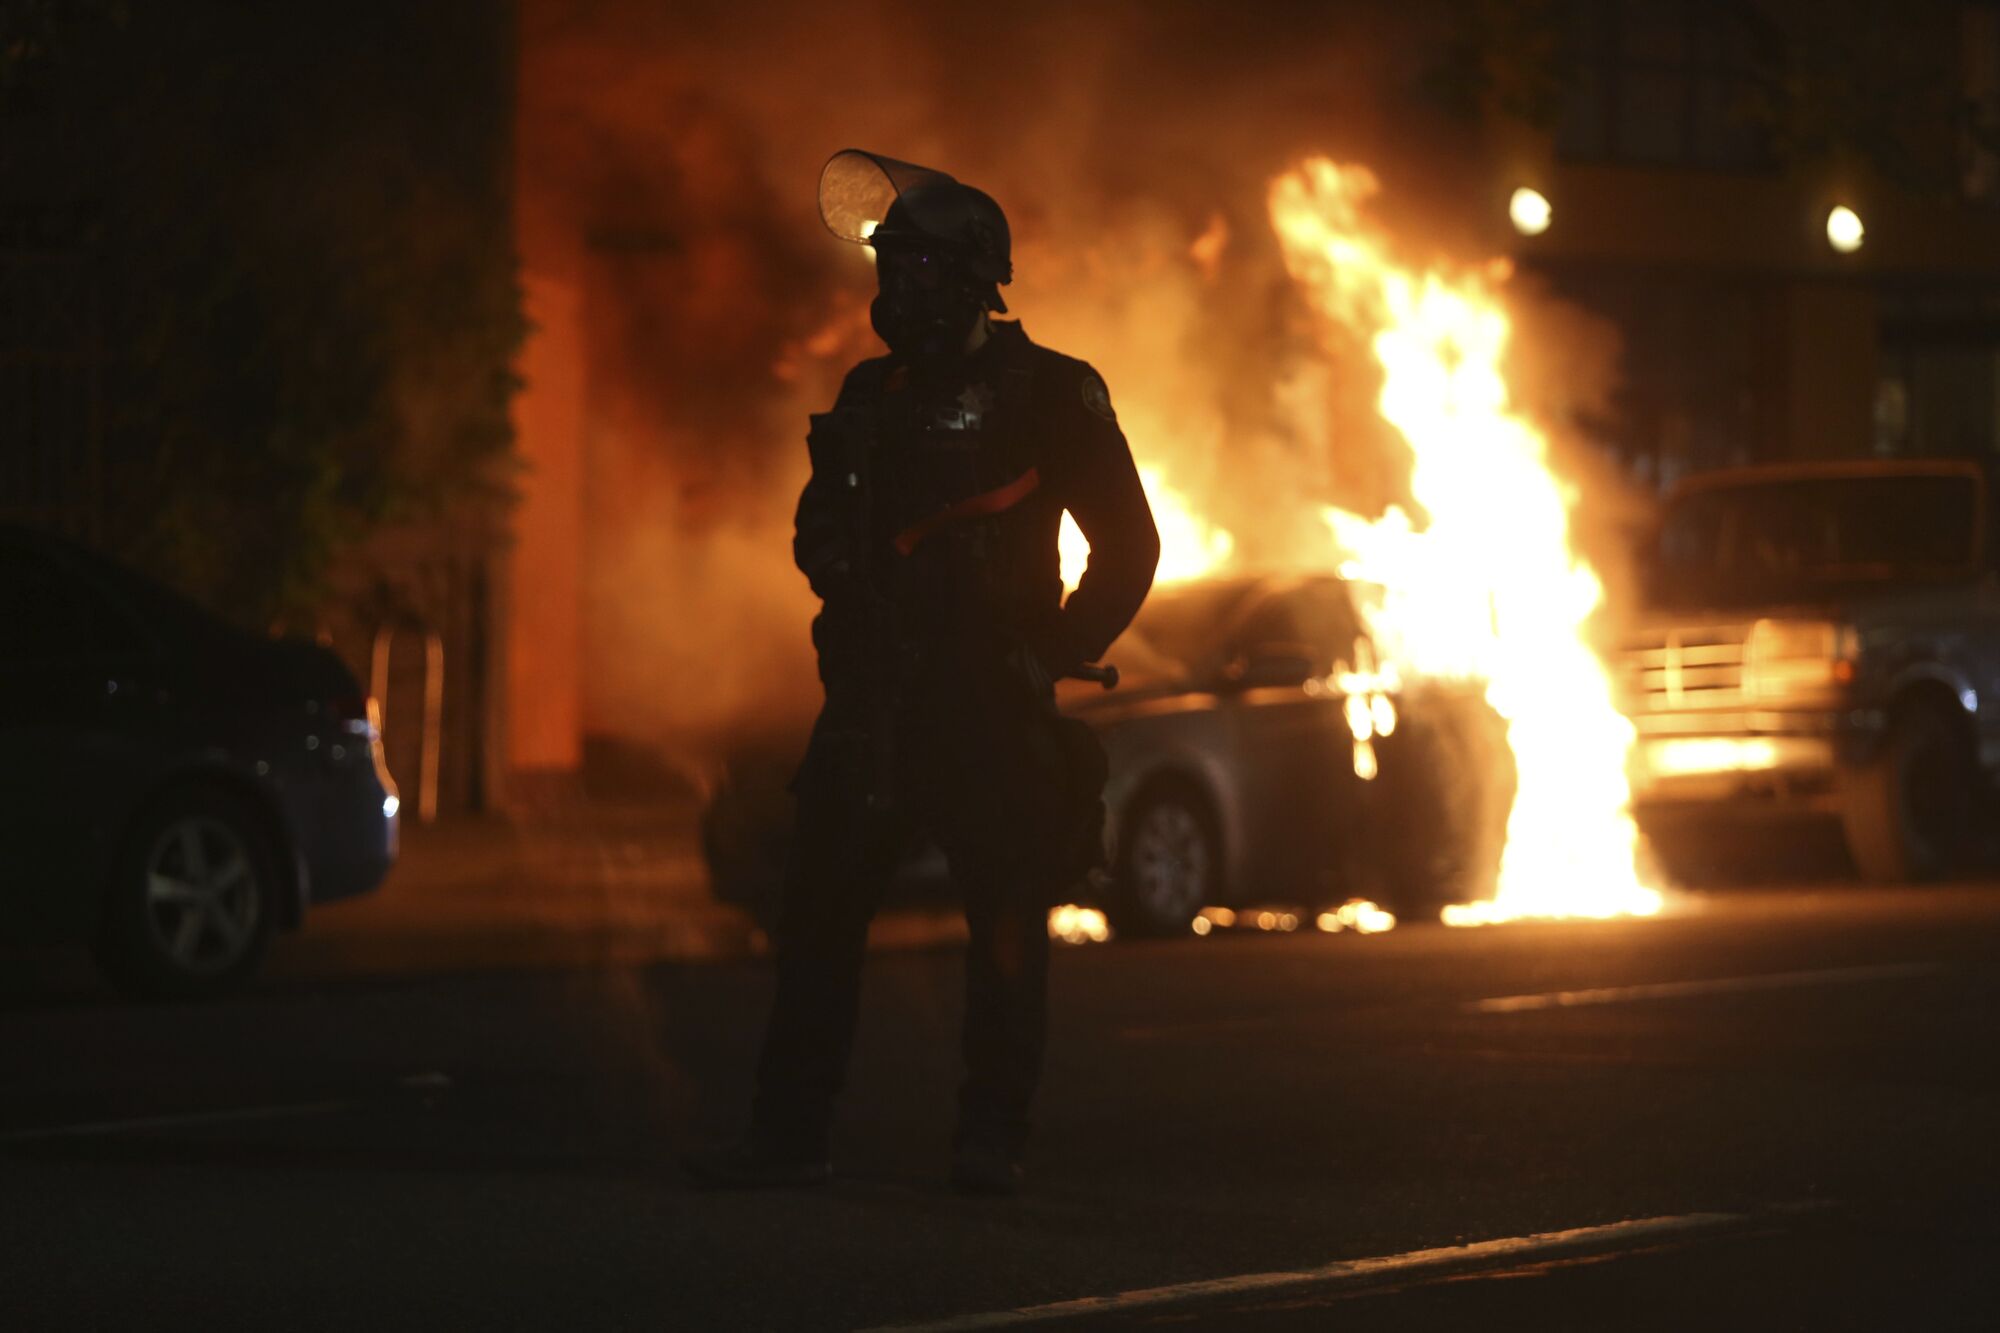 A police officer is silhouetted near a burning car.